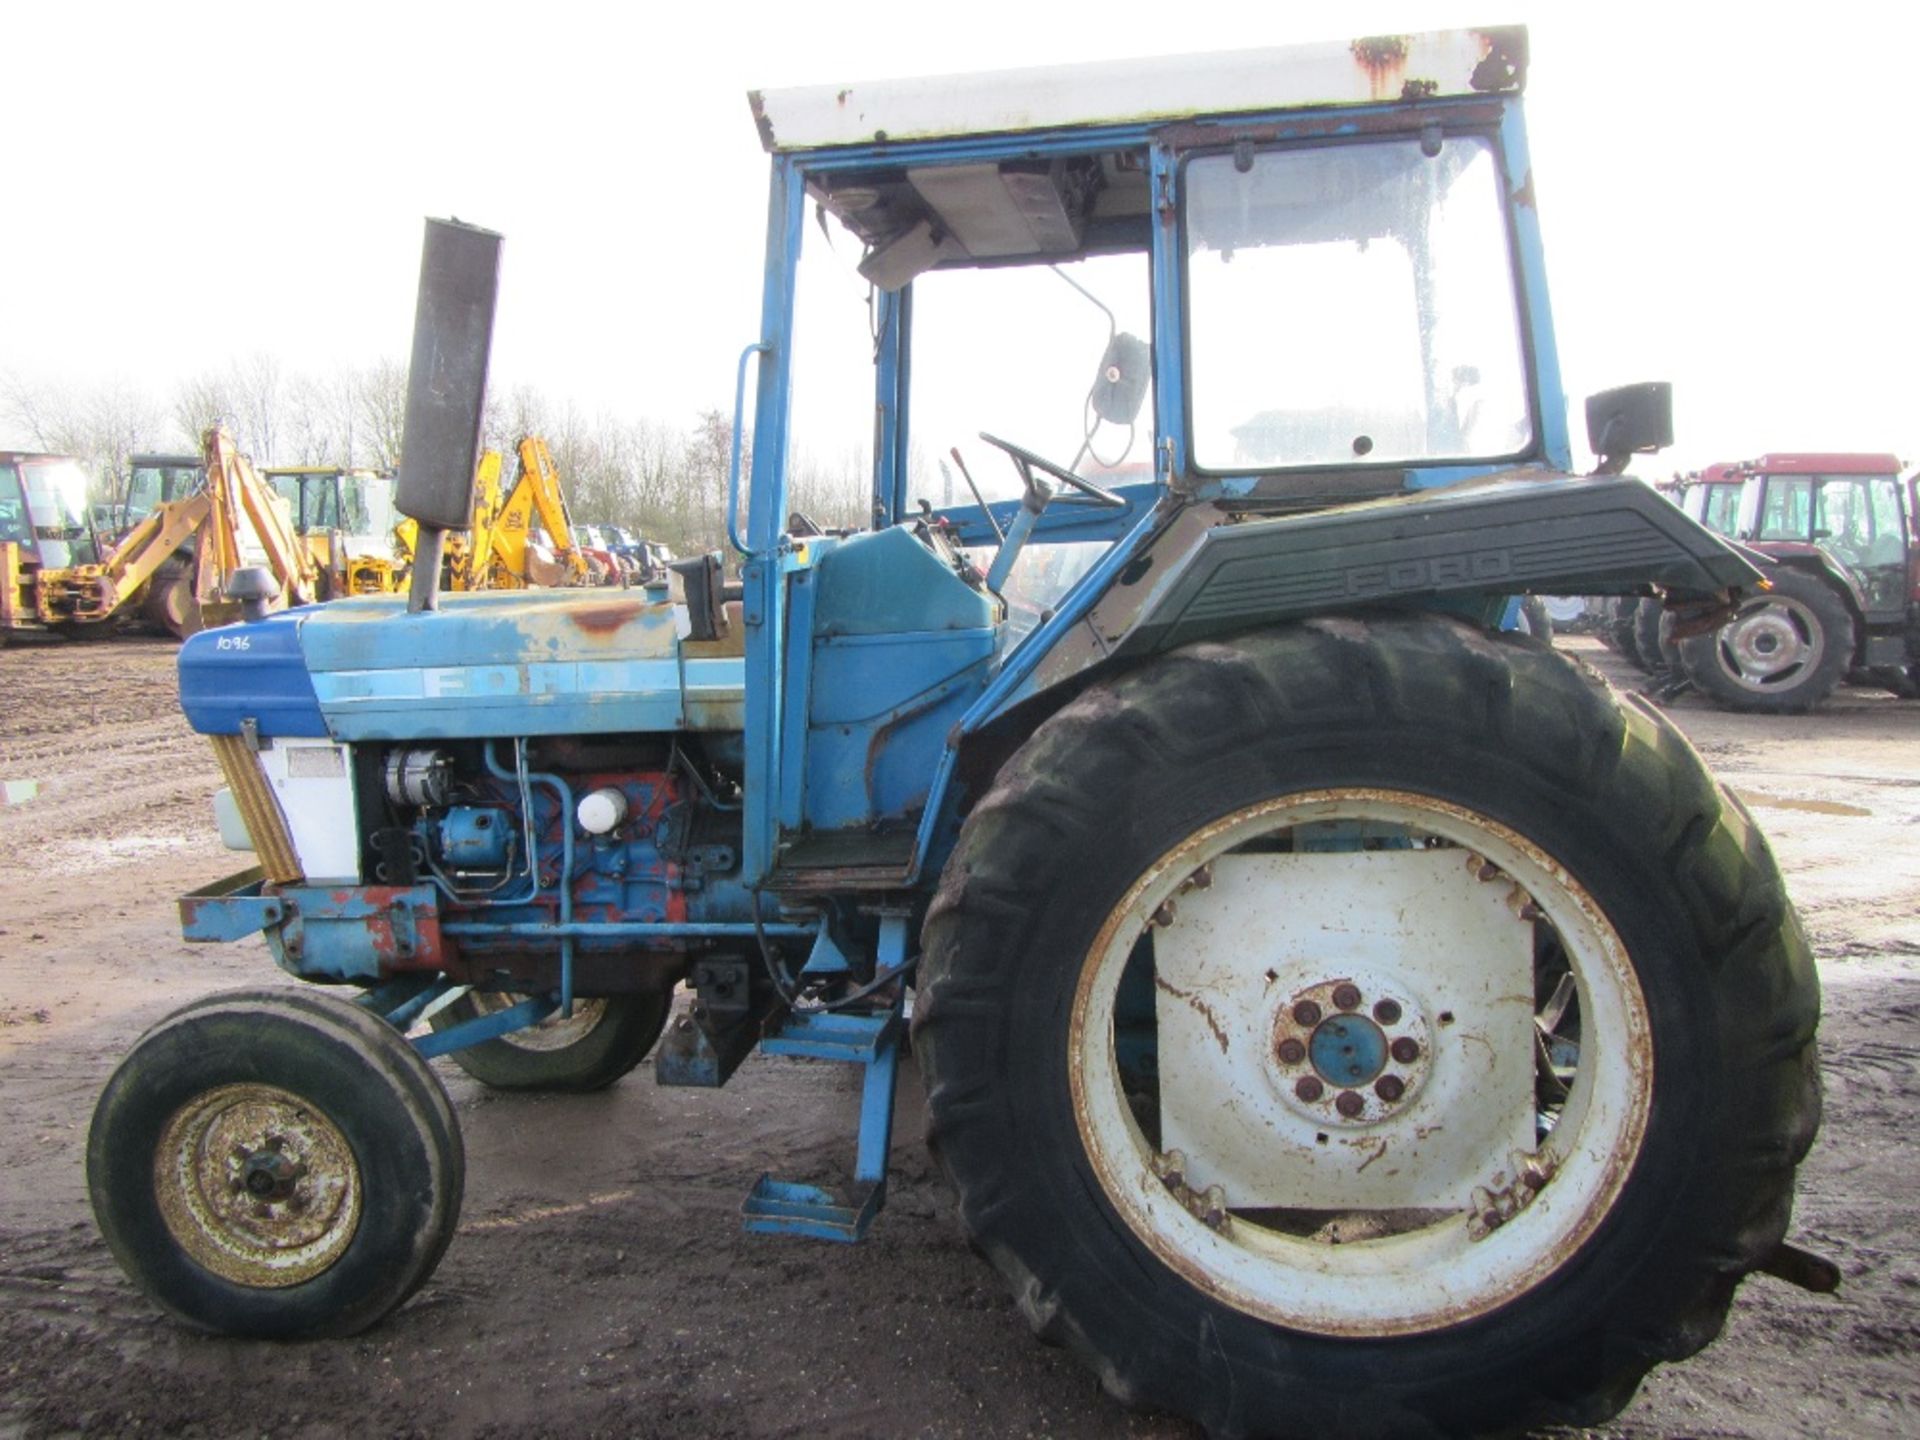 Ford 5610 2wd Tractor c/w Floor Change Gearbox. Reg. No. B621 UOW Ser. No. BA22021 - Image 8 of 10